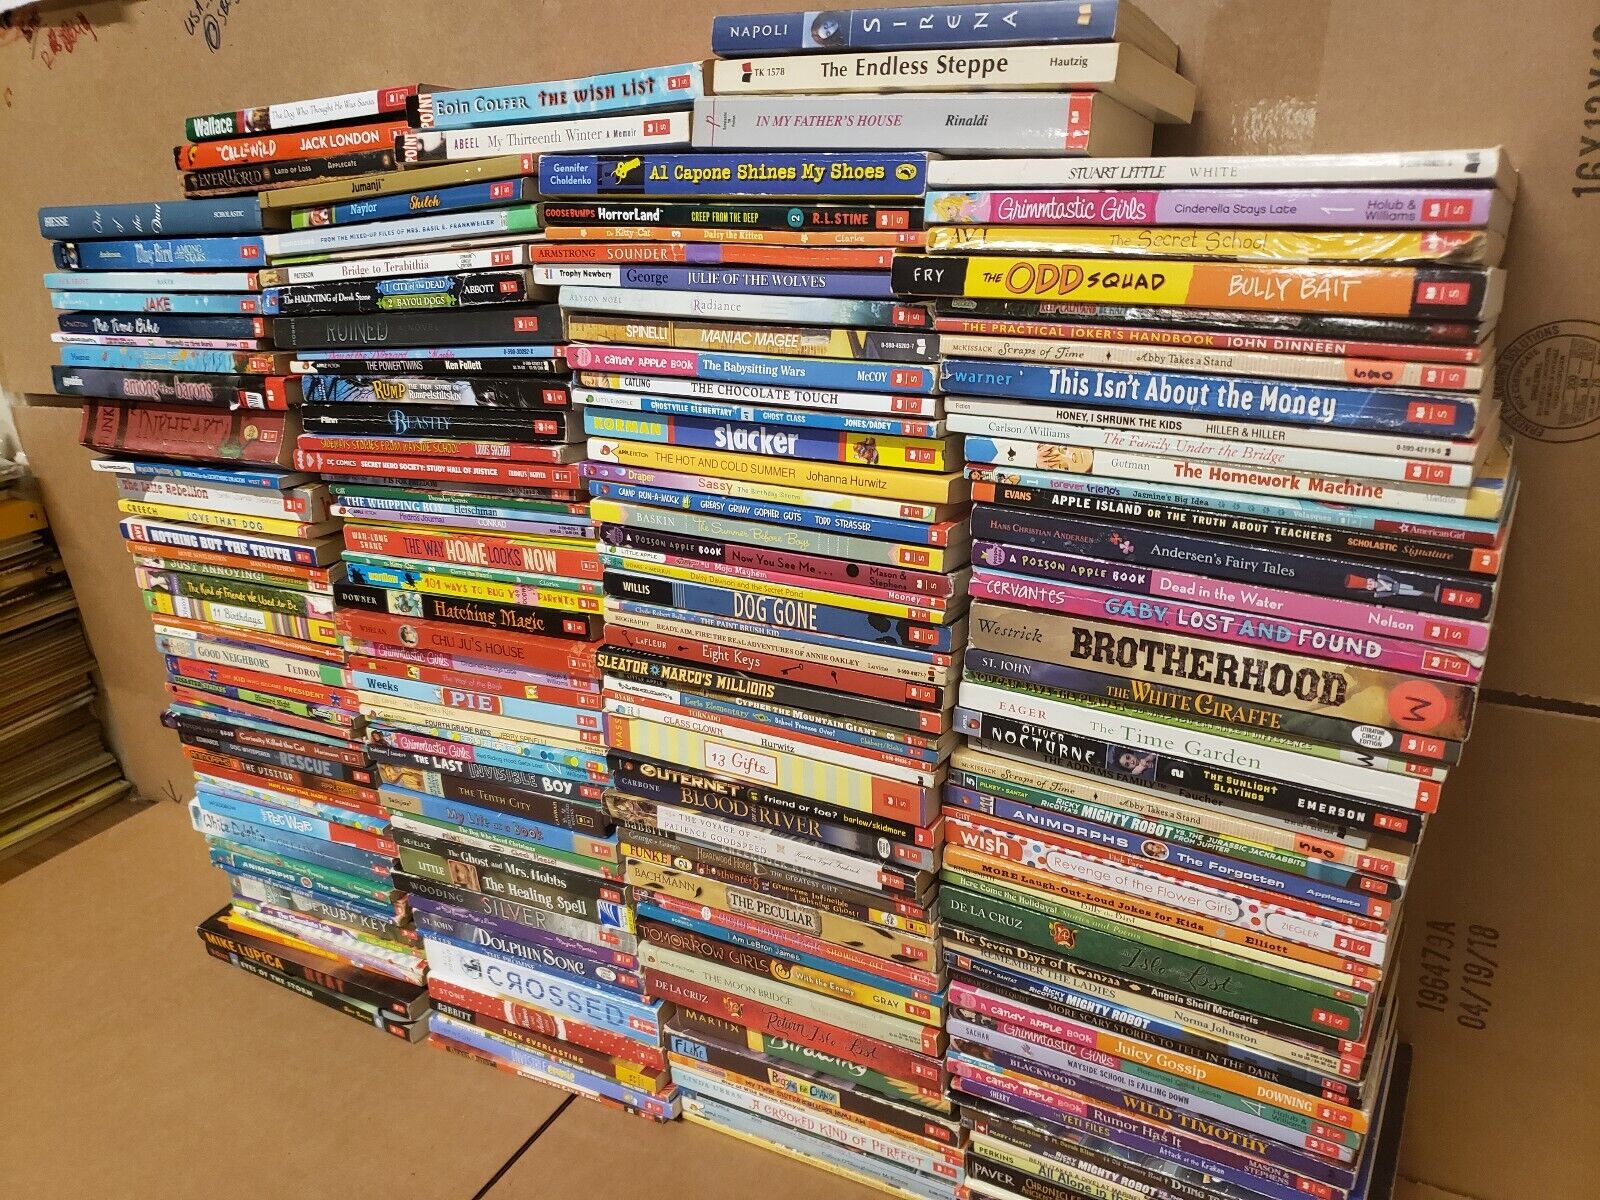 Lot of 50 Chapter INSTANT LIBRARY Children Young Adult RANDOM UNSORTED BOOKS MIX Без бренда